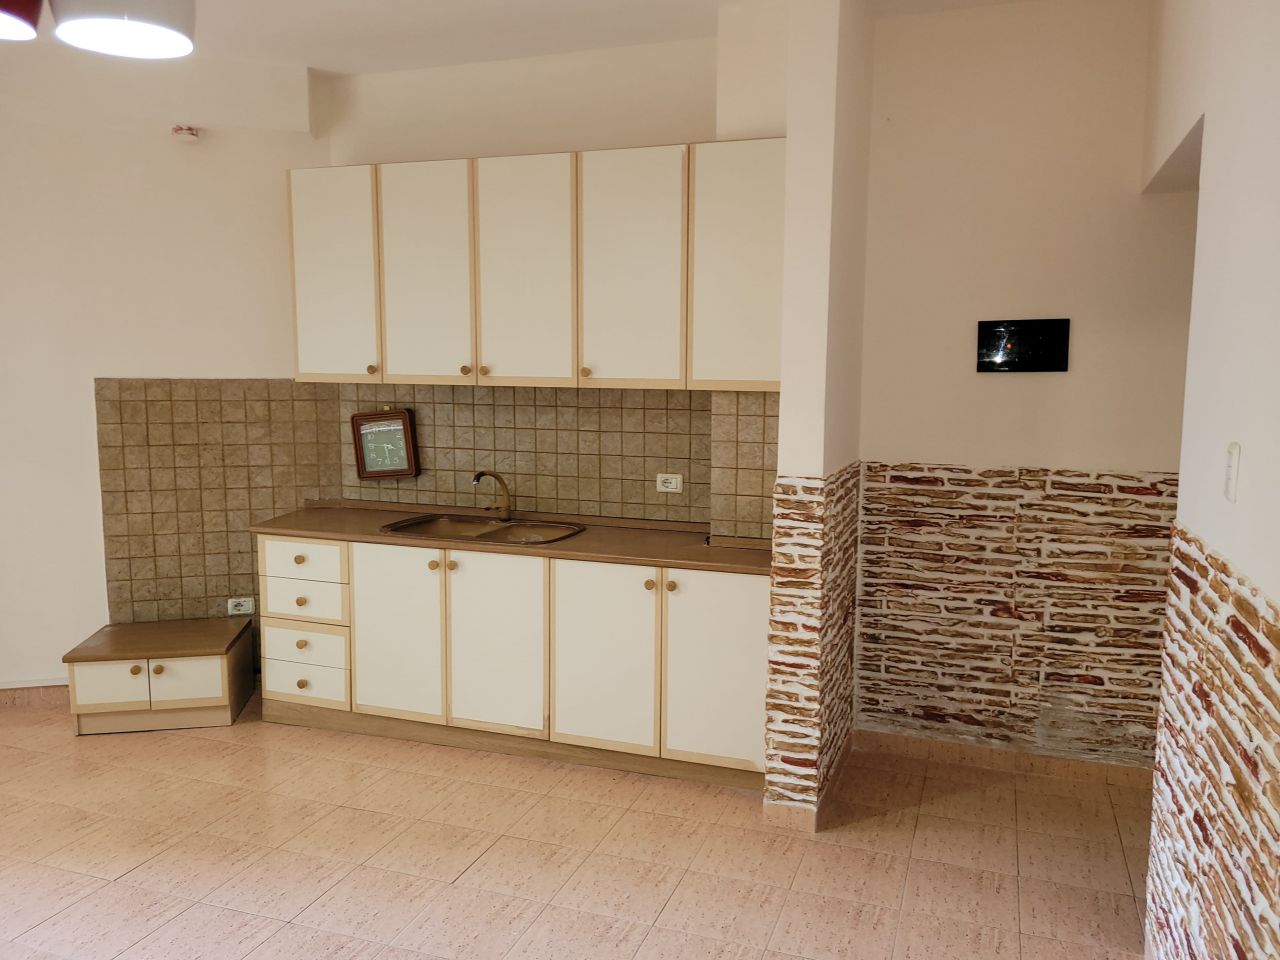 Three Bedroom Apartment For Sale In Golem Durres Albania 5 Minutes Far From The Sea